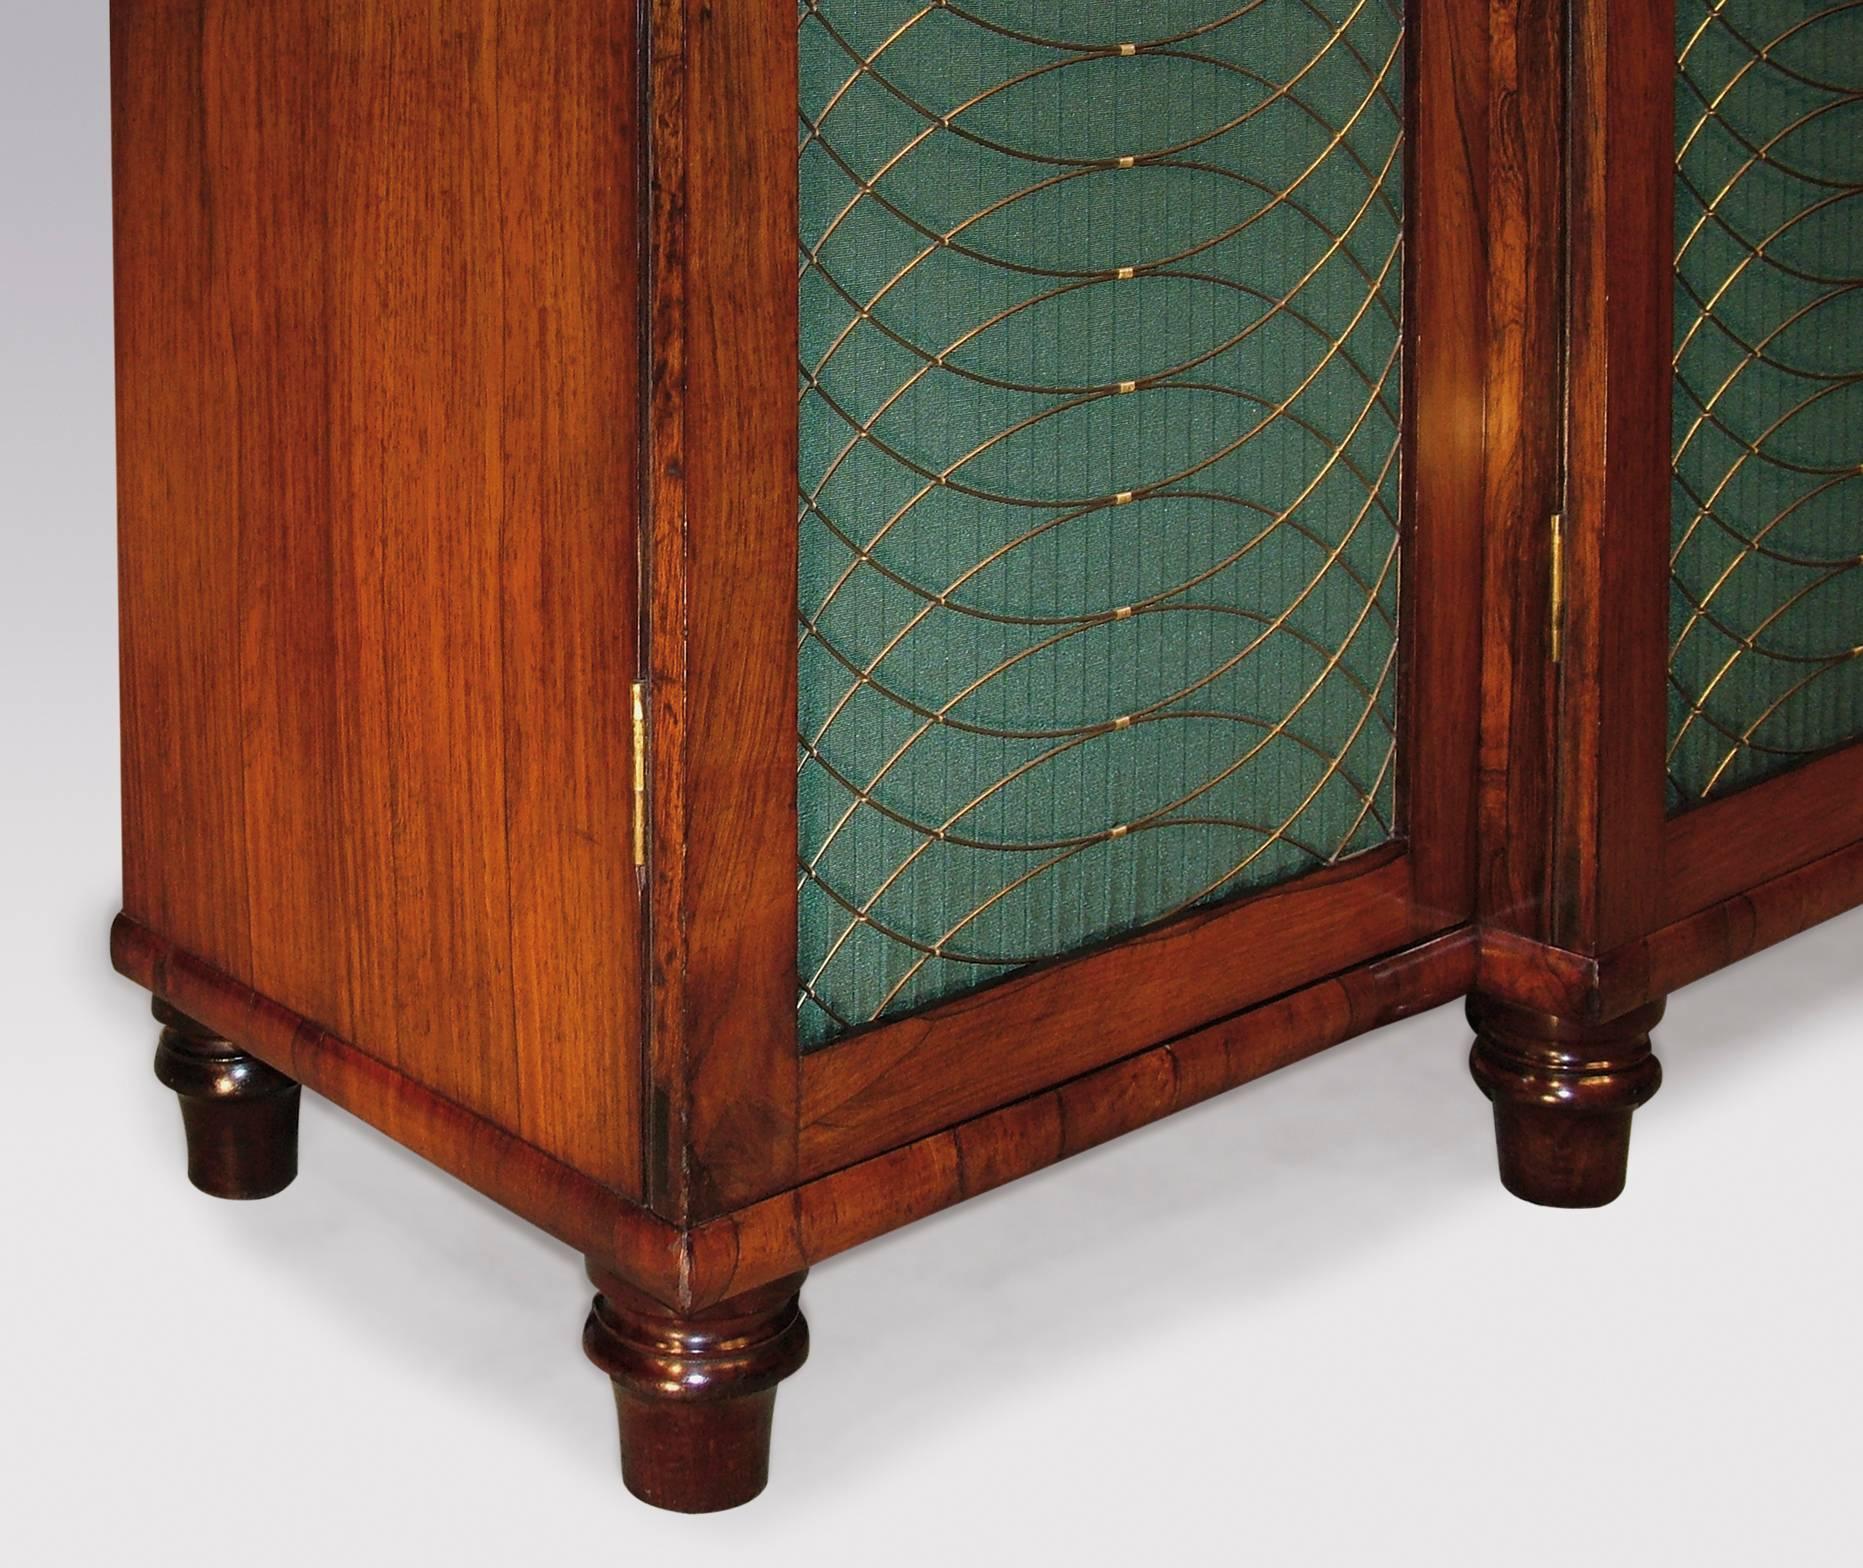 An early 19th century Regency period rosewood breakfront Chiffonier, having end-grain moulded edged top, above four silk-pleated brass grille doors, ending on turned feet.